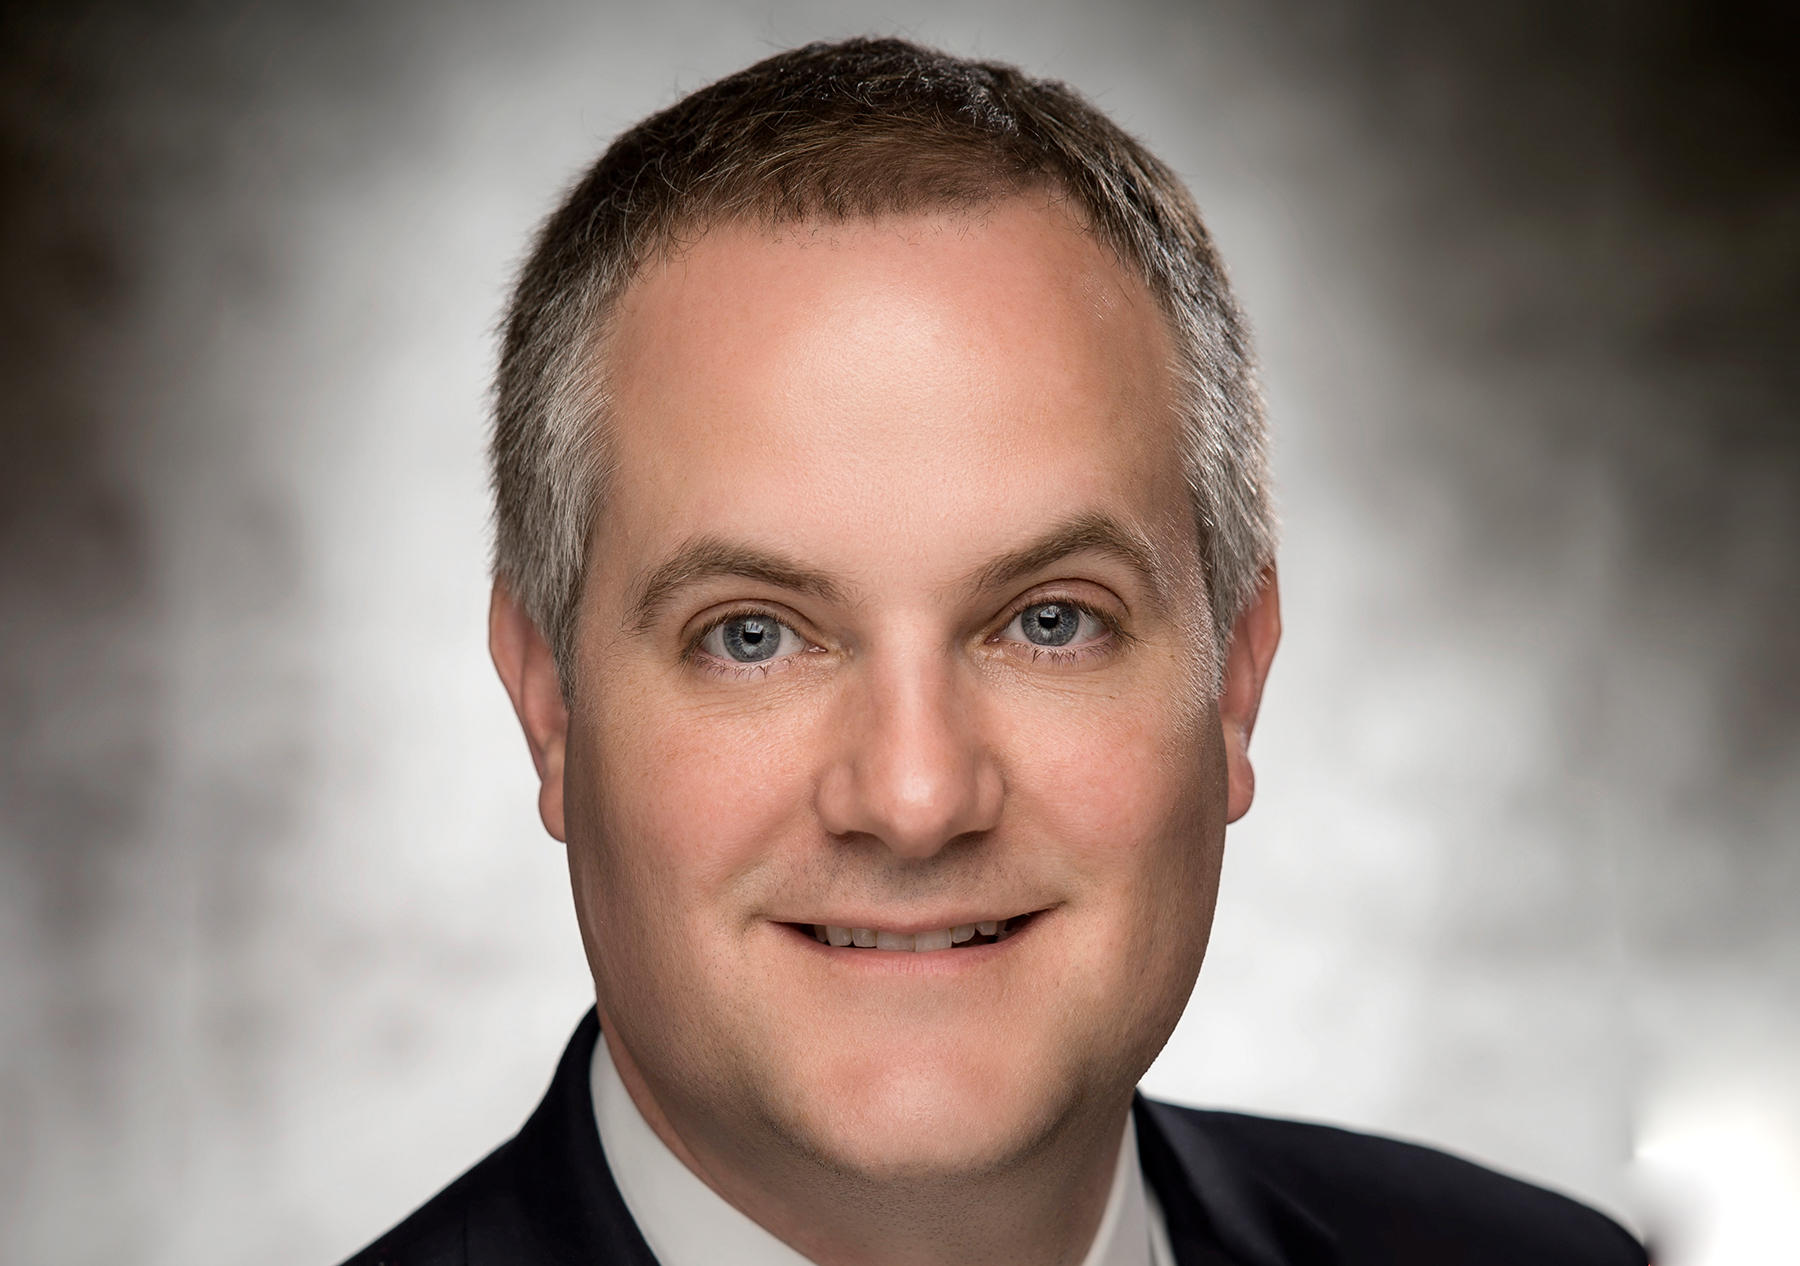 Dr. David Catarious to be Director of Cybersecurity Programs & Chief Information Officer